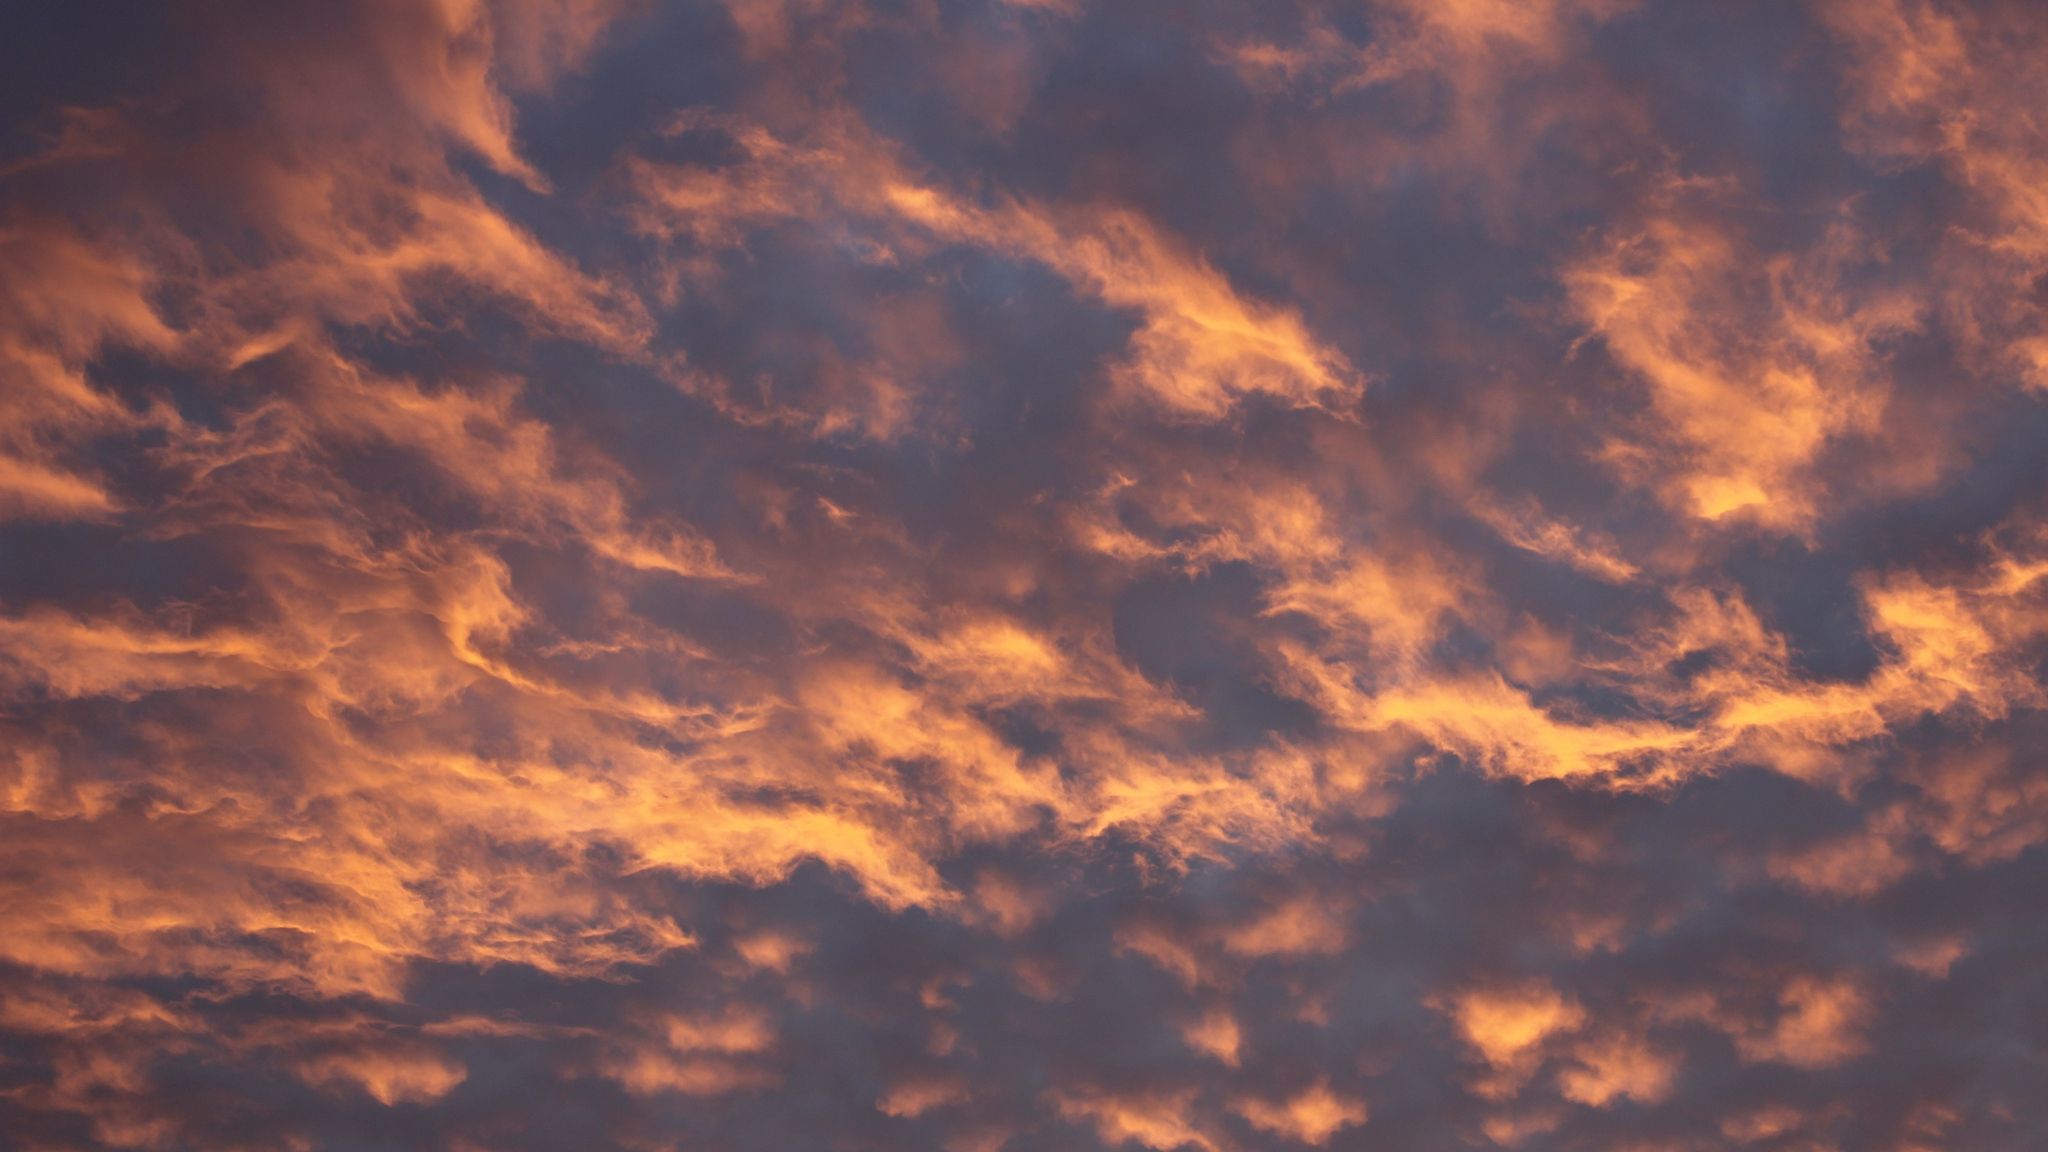 Download wallpaper 2048x1152 sky, clouds, evening, pink, yellowx1152 wallpaper, Sky aesthetic, Youtube banner background